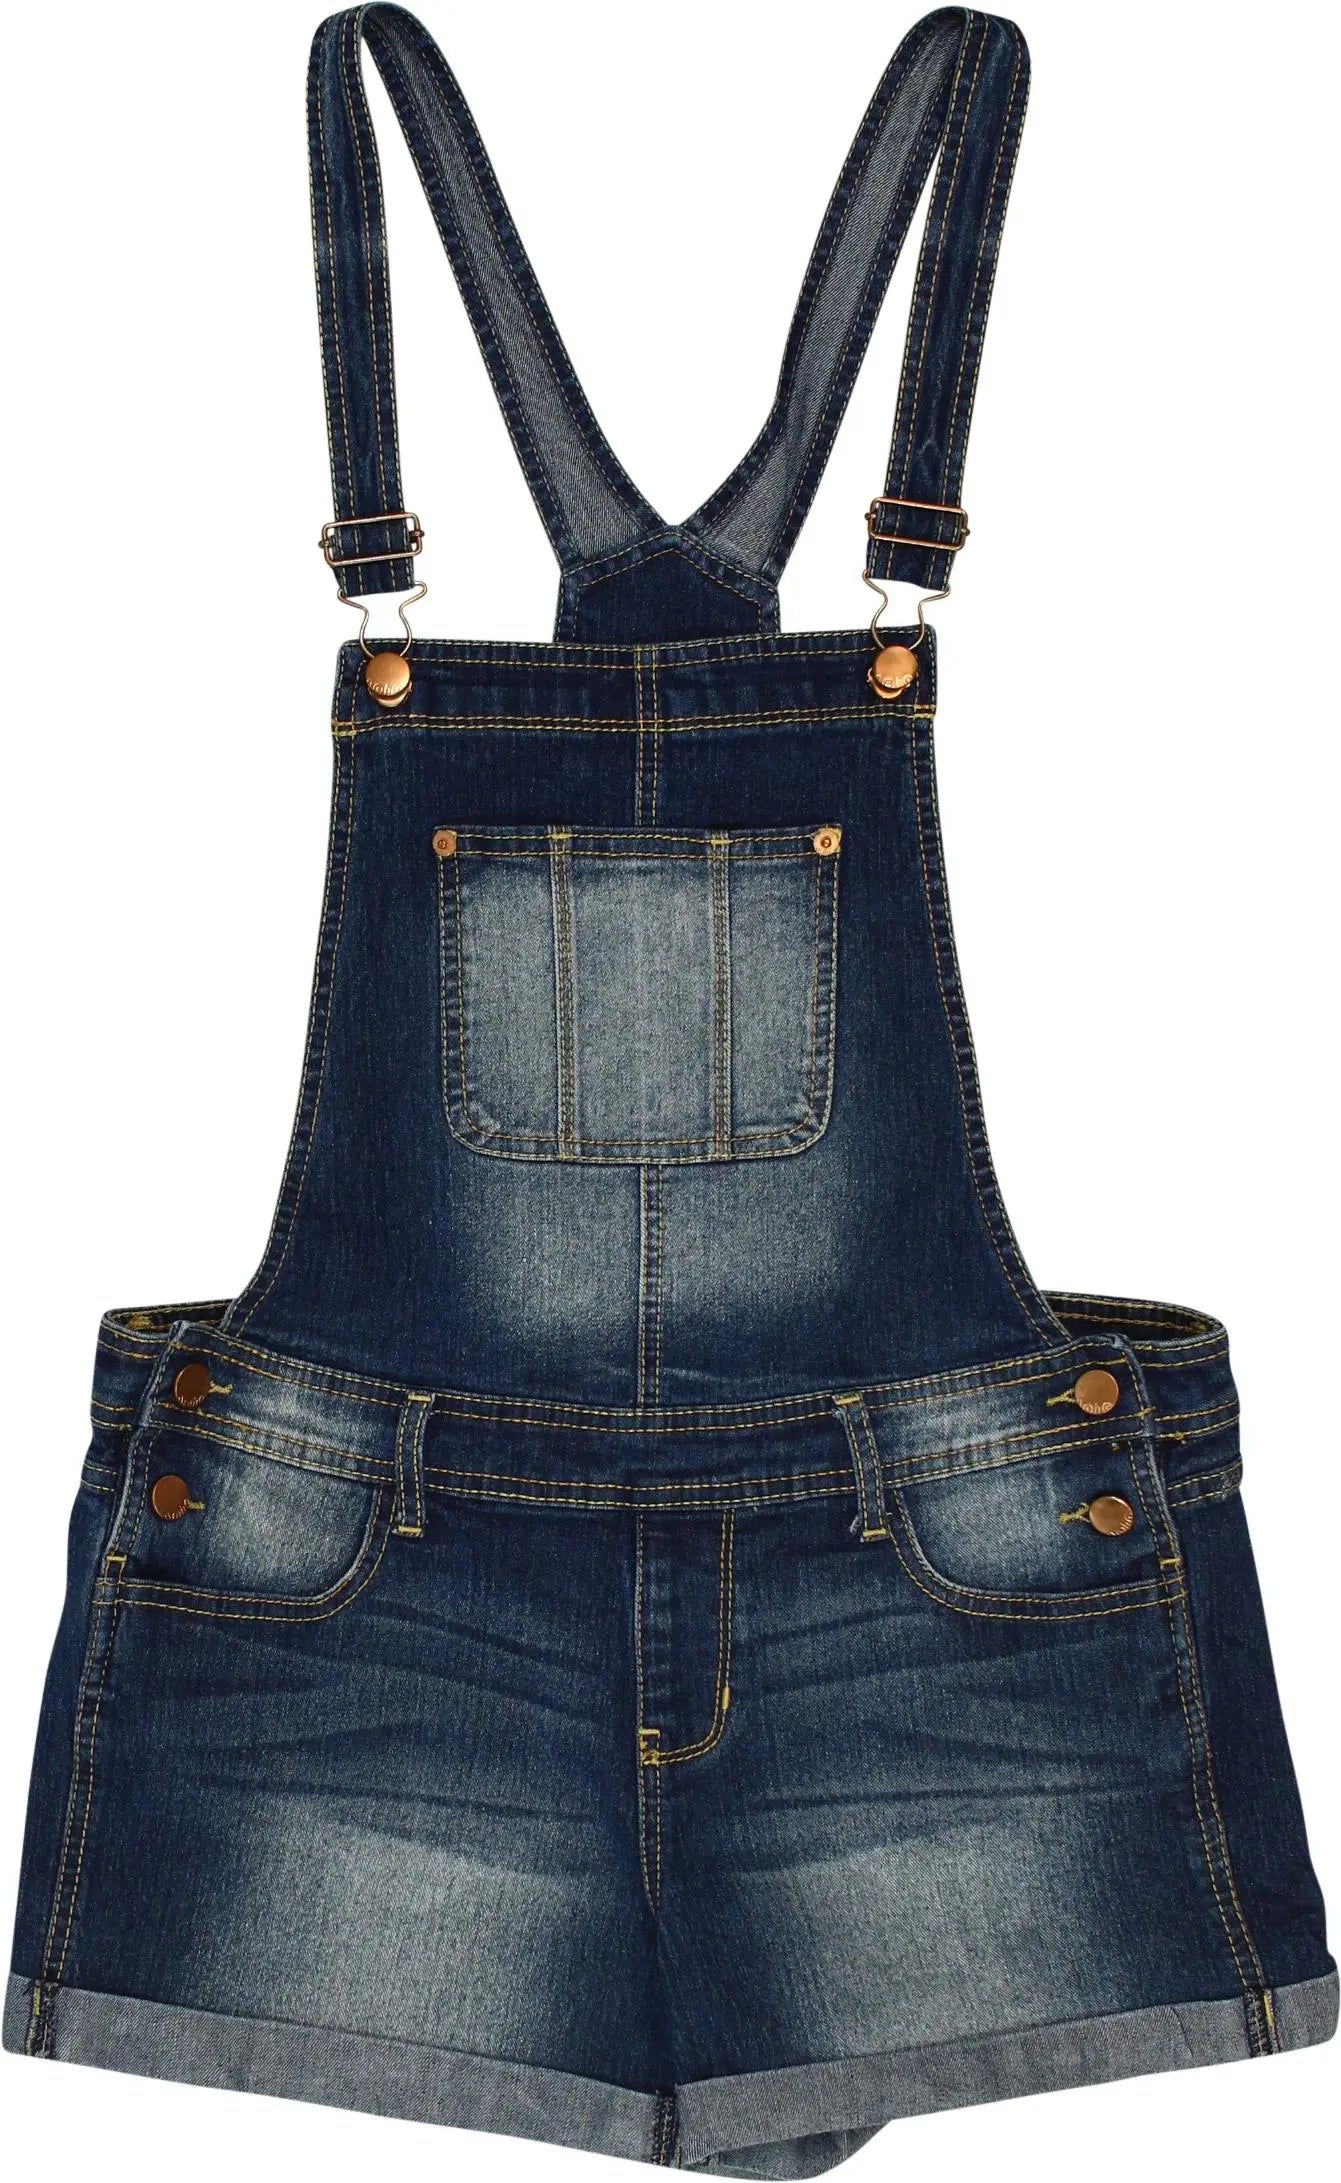 Vintage Dungarees for Women, Stylish & Comfortable